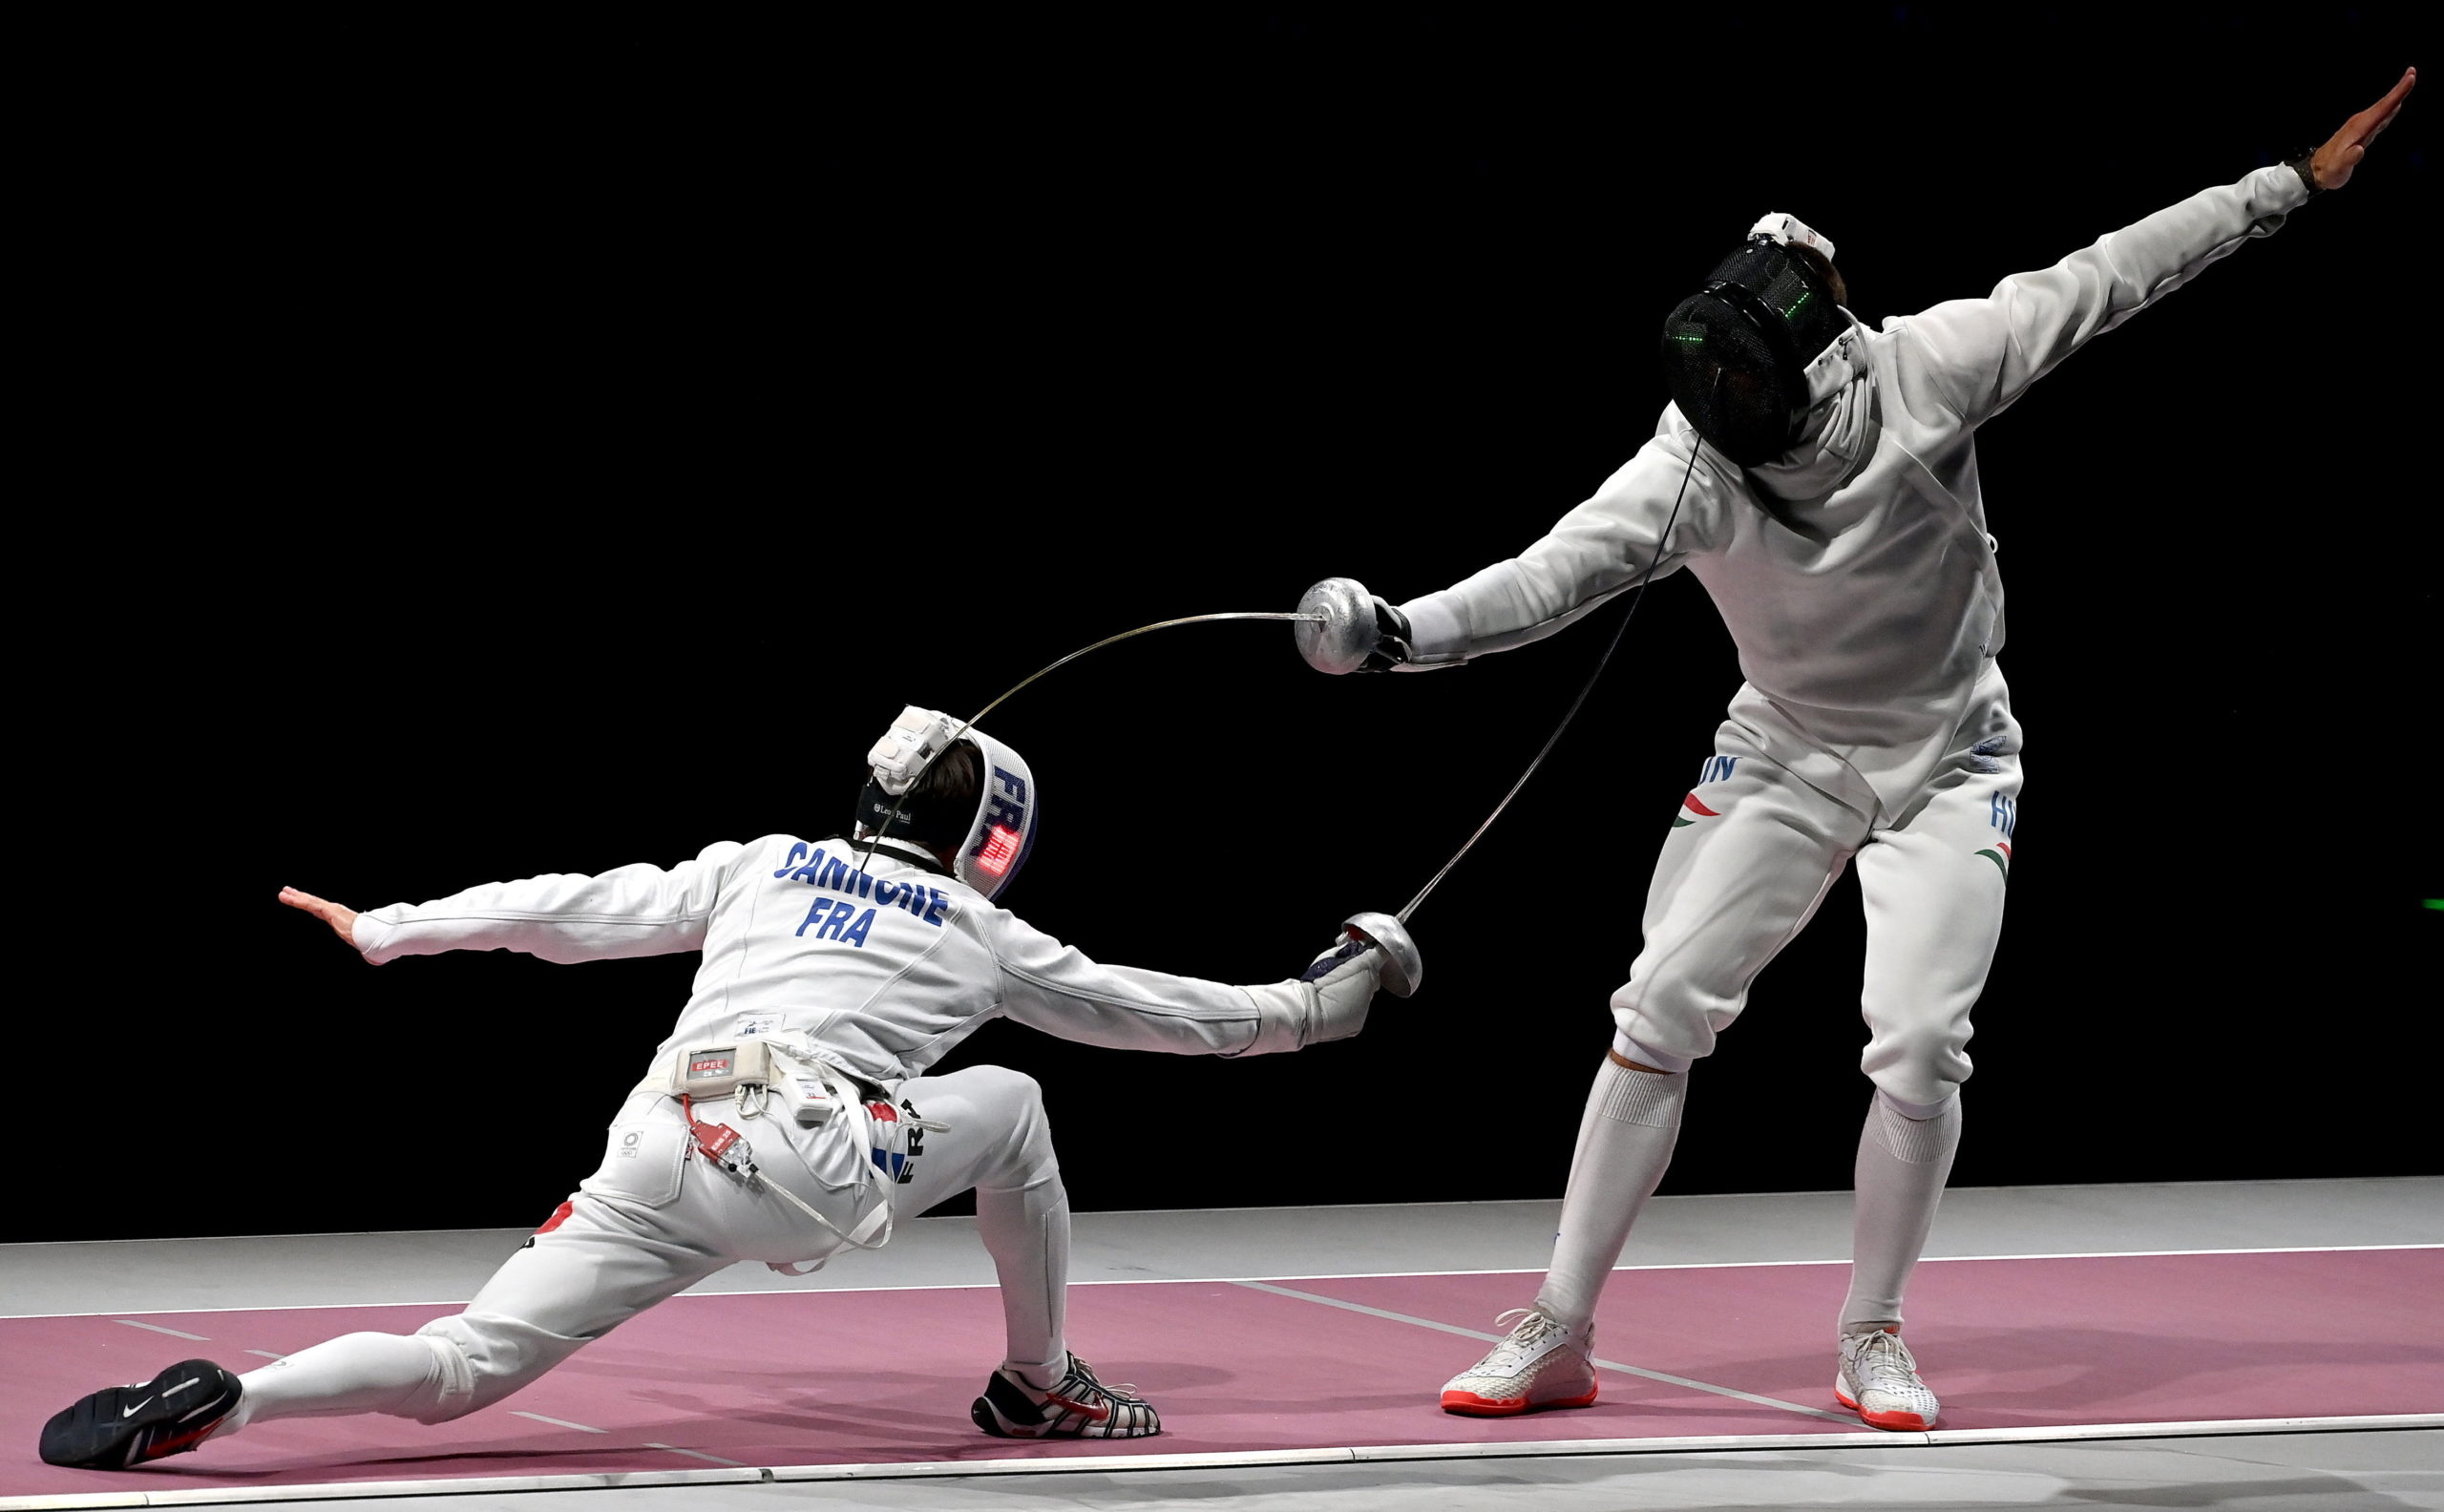 Gergely Siklosi, Fencing champion, Hungarian athlete, Epee specialist, 2560x1590 HD Desktop